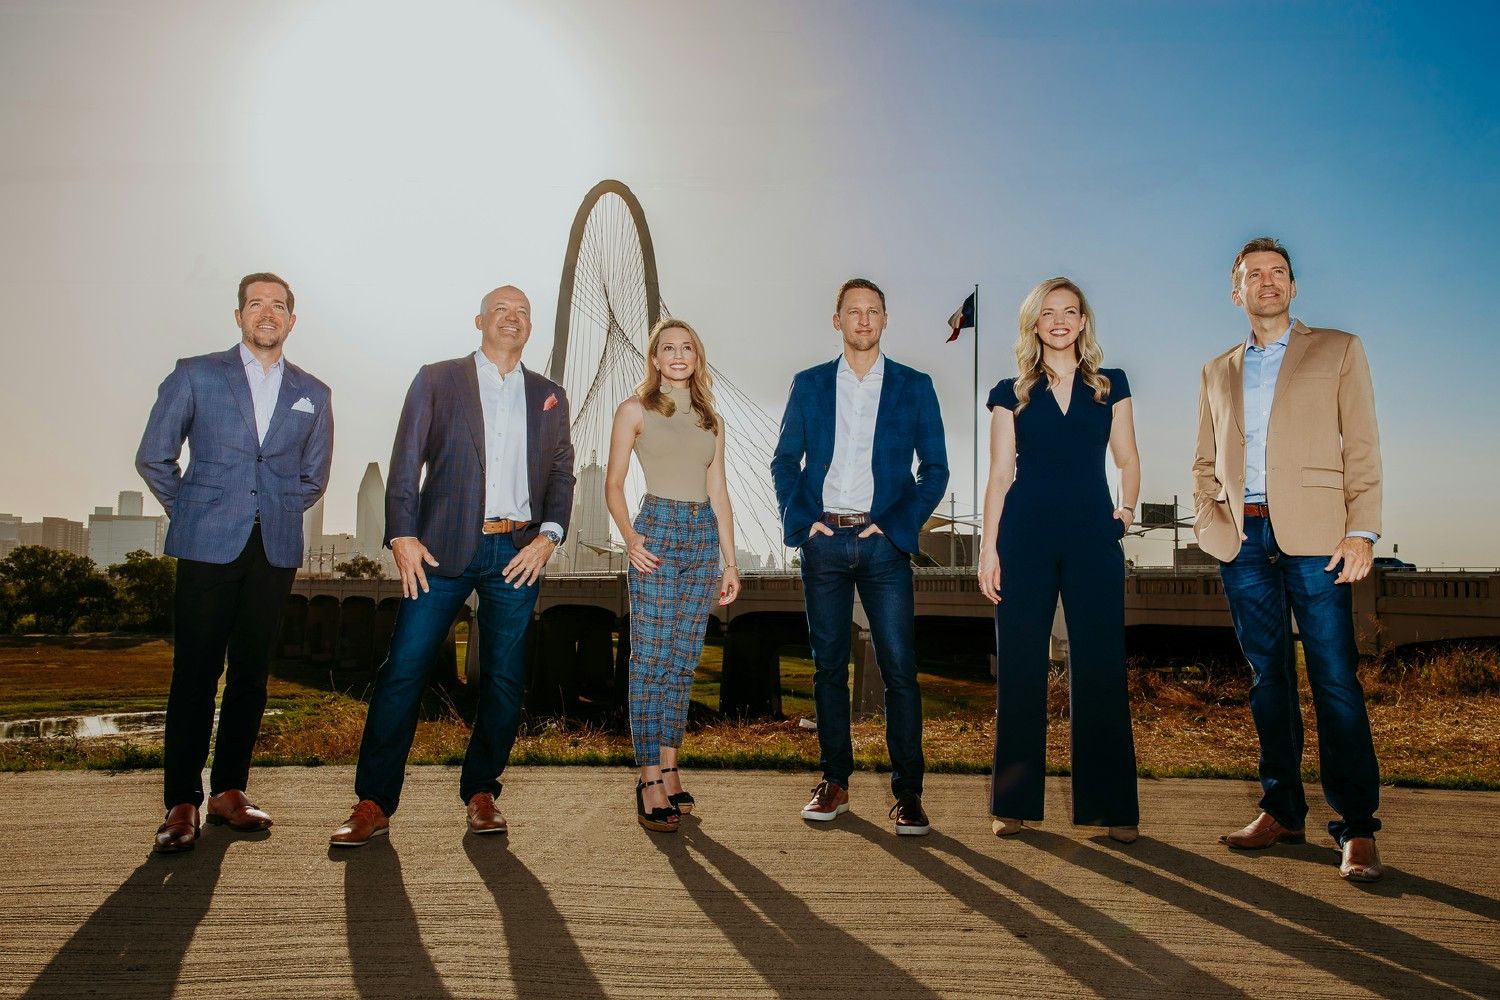 The Bridge leadership team for our Brand Launch photo shoot. 